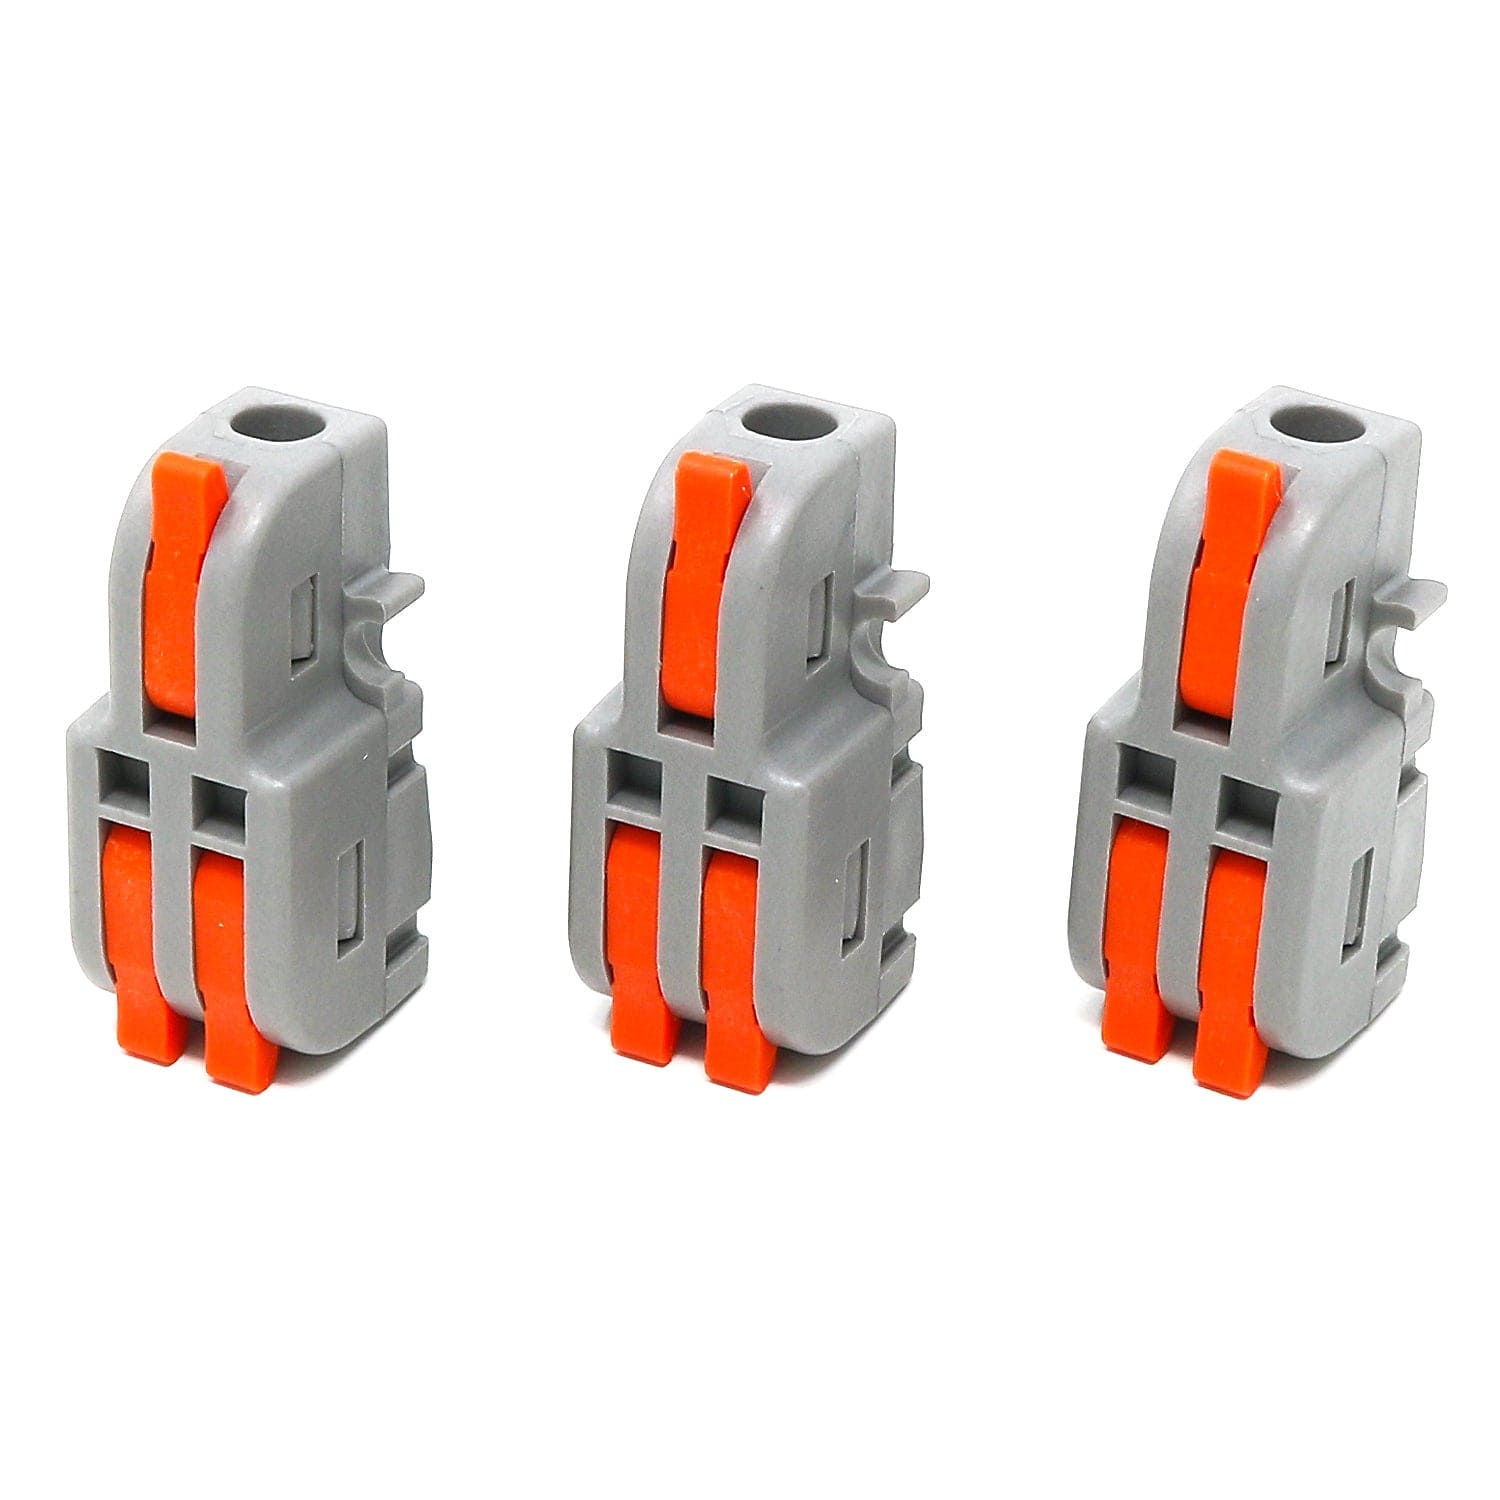 2-Way Fast Wire Splitters - Pack of 3 - The Pi Hut